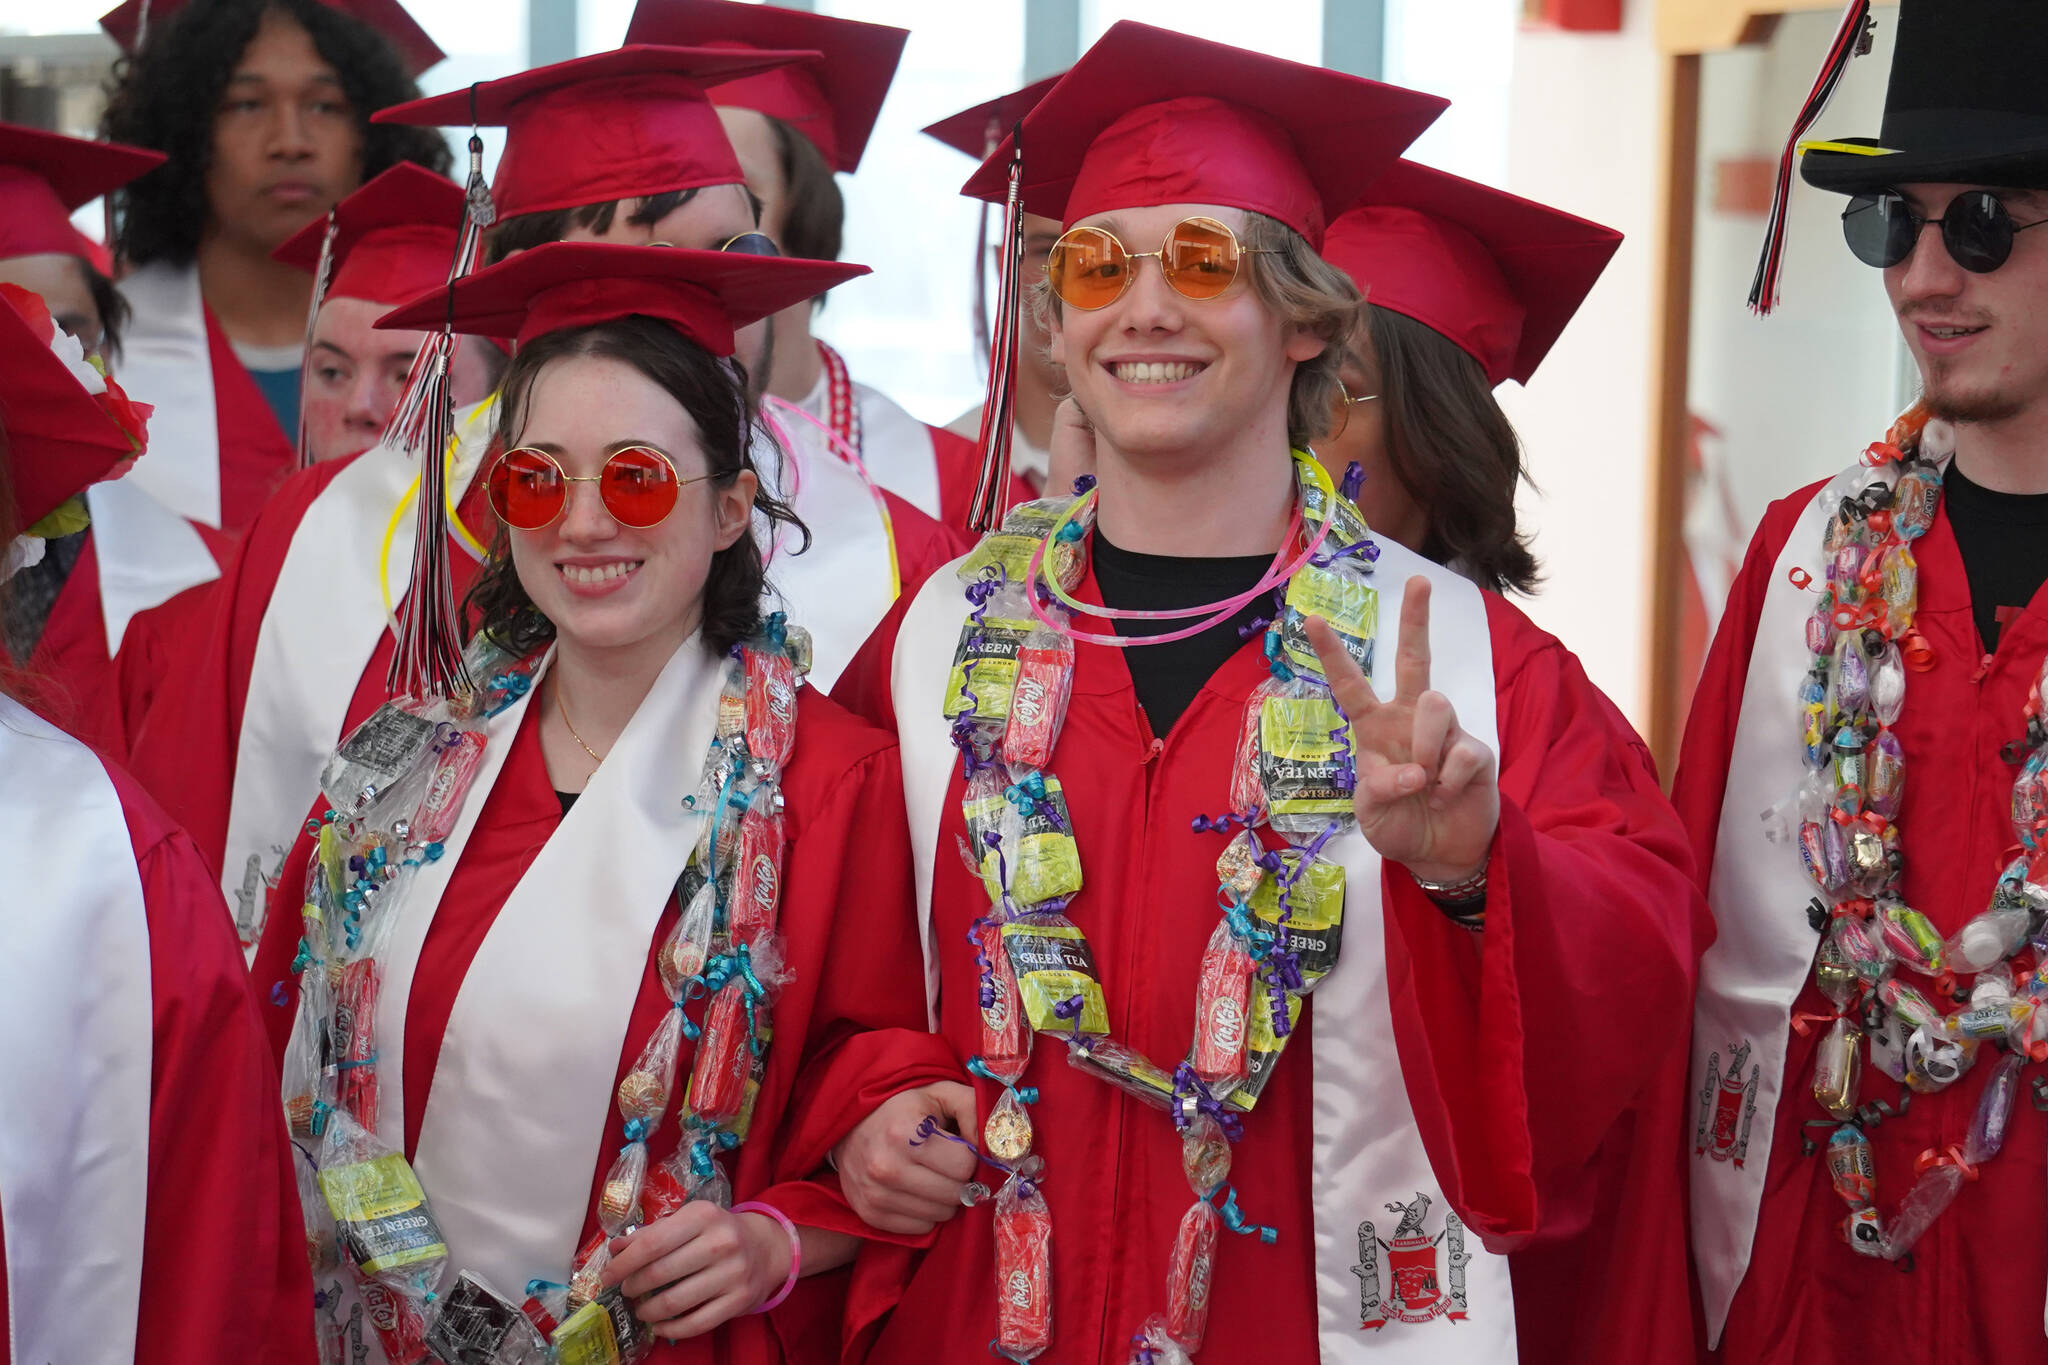 Ayla Tallent and Kage Adkins prepare to enter the auditorium for their graduation ceremony on Wednesday, May 17, 2023, at Kenai Central High School in Kenai, Alaska. (Jake Dye/Peninsula Clarion)